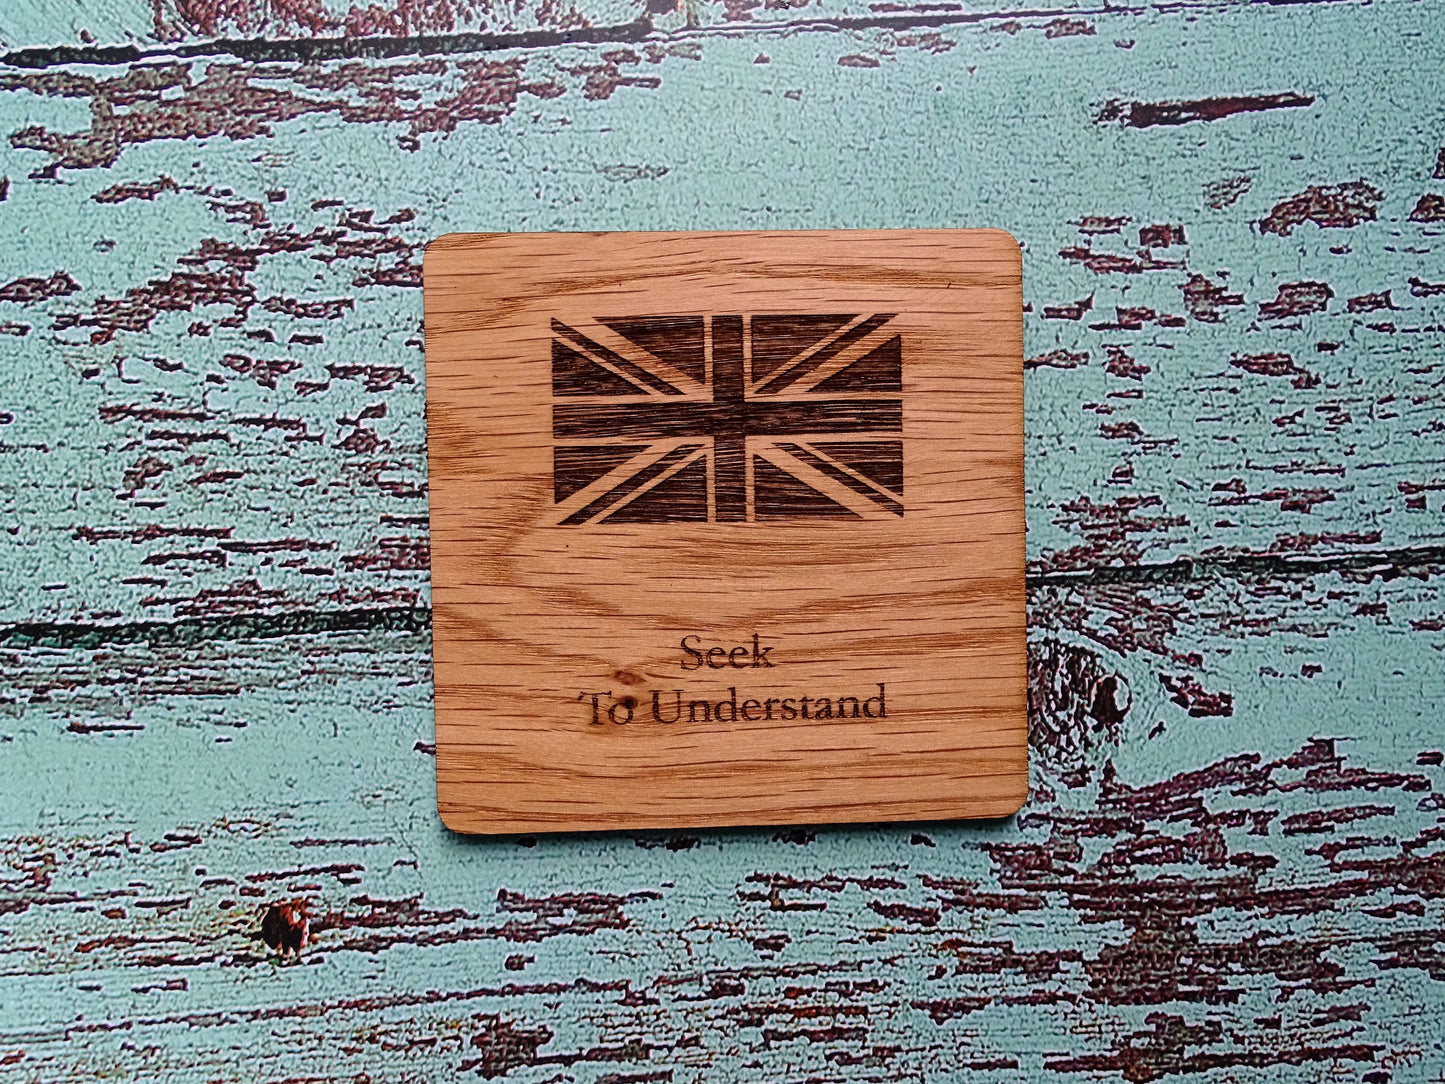 Wooden Coasters With English Proverbs, British Gift, Oak Coasters